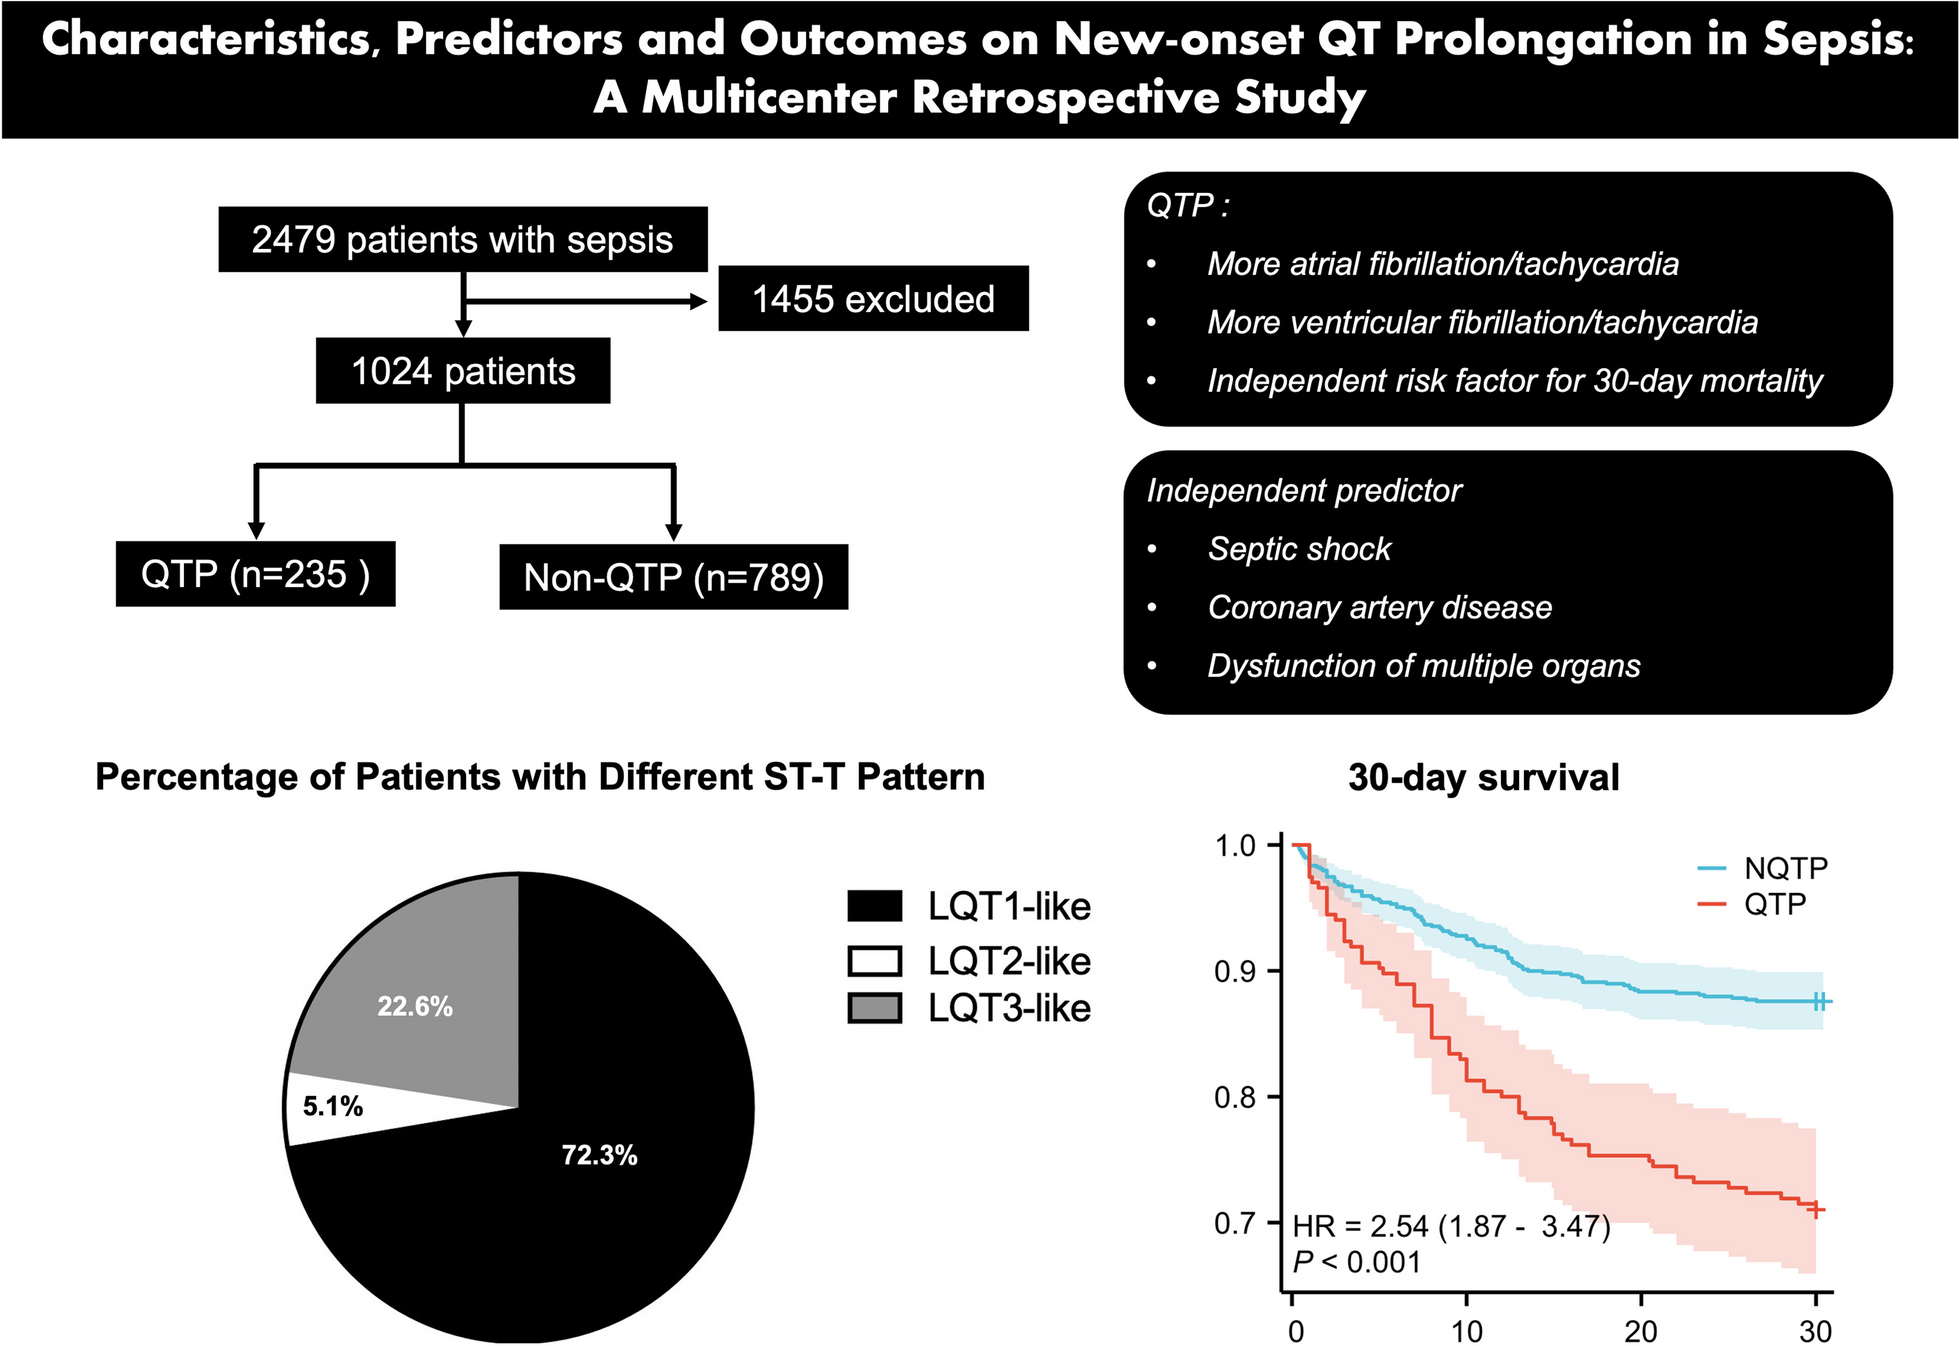 Characteristics, predictors and outcomes of new-onset QT prolongation in sepsis: a multicenter retrospective study